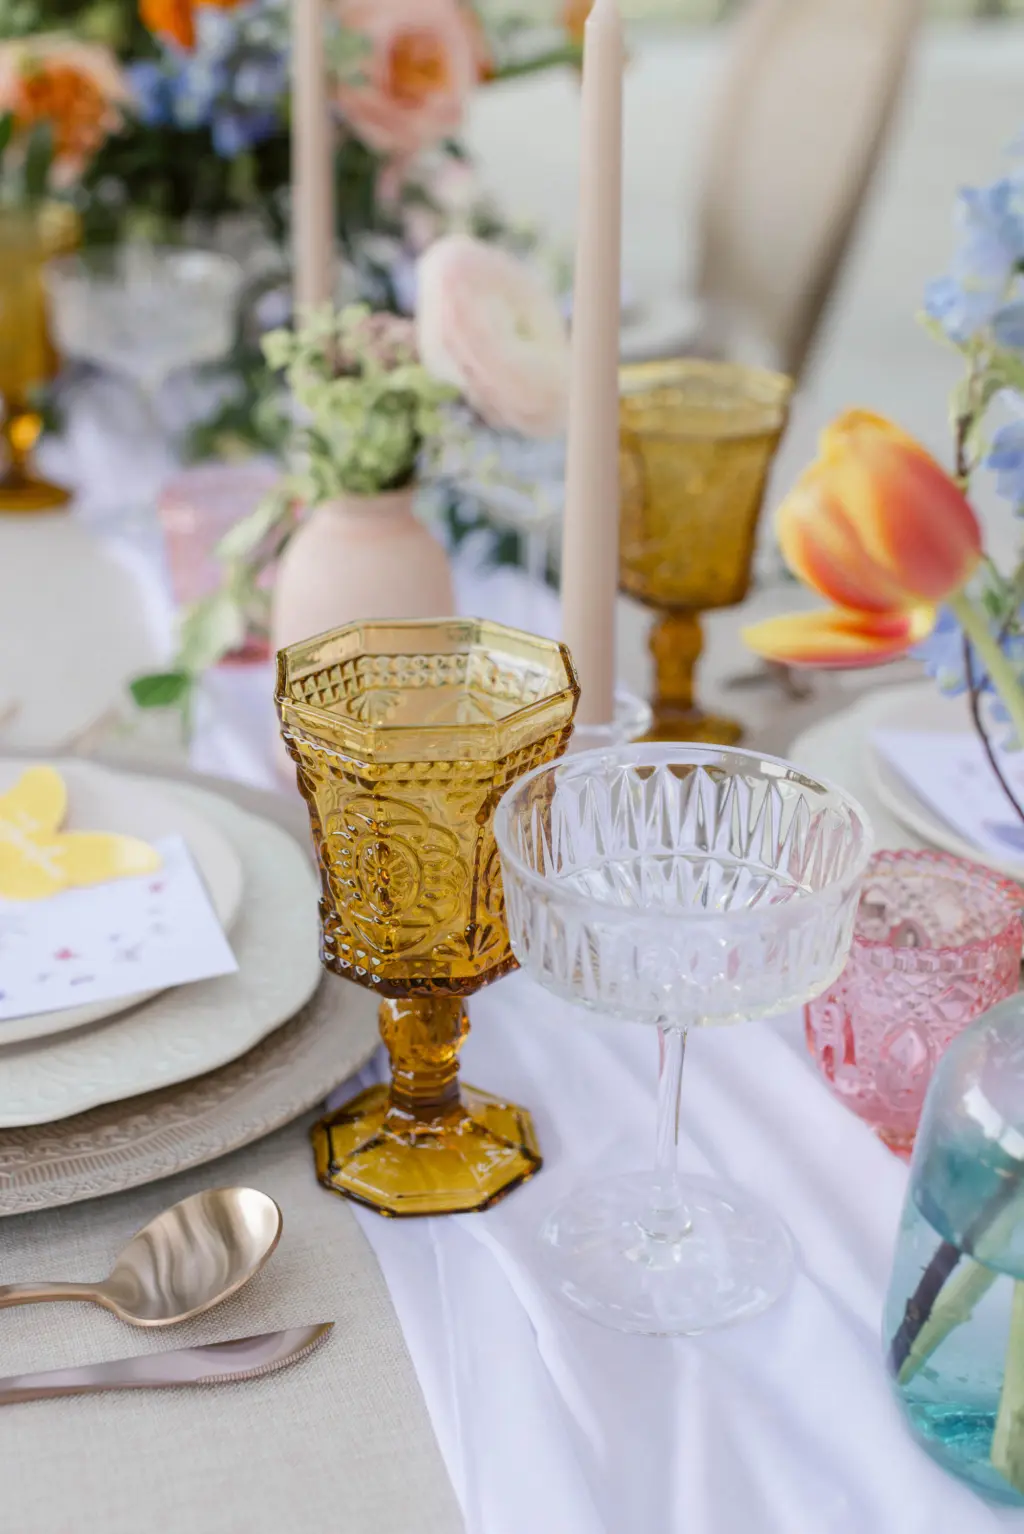 Whimsical Spring Vineyard Inspired Wedding Reception Decor Ideas with Colored Vintage Goblets and Coupe Glasses